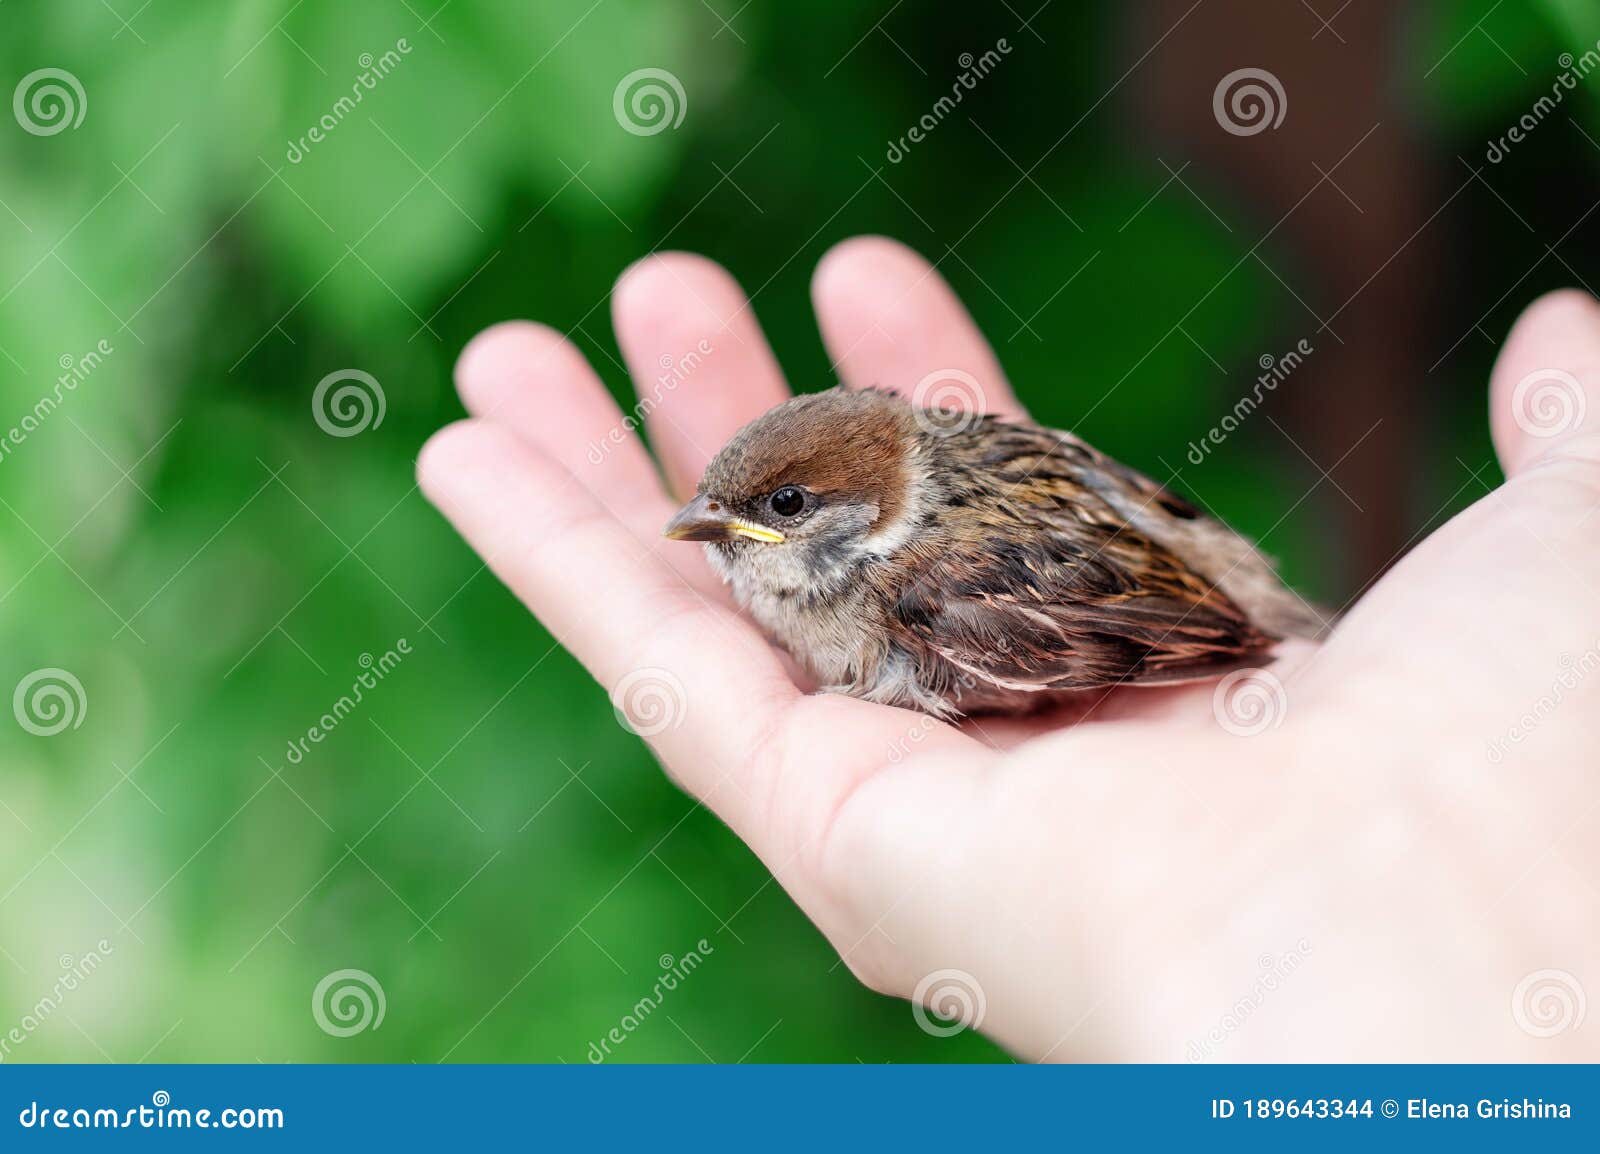 little chick is sitting on the palm of his hand. sparrow chick in the hand of man